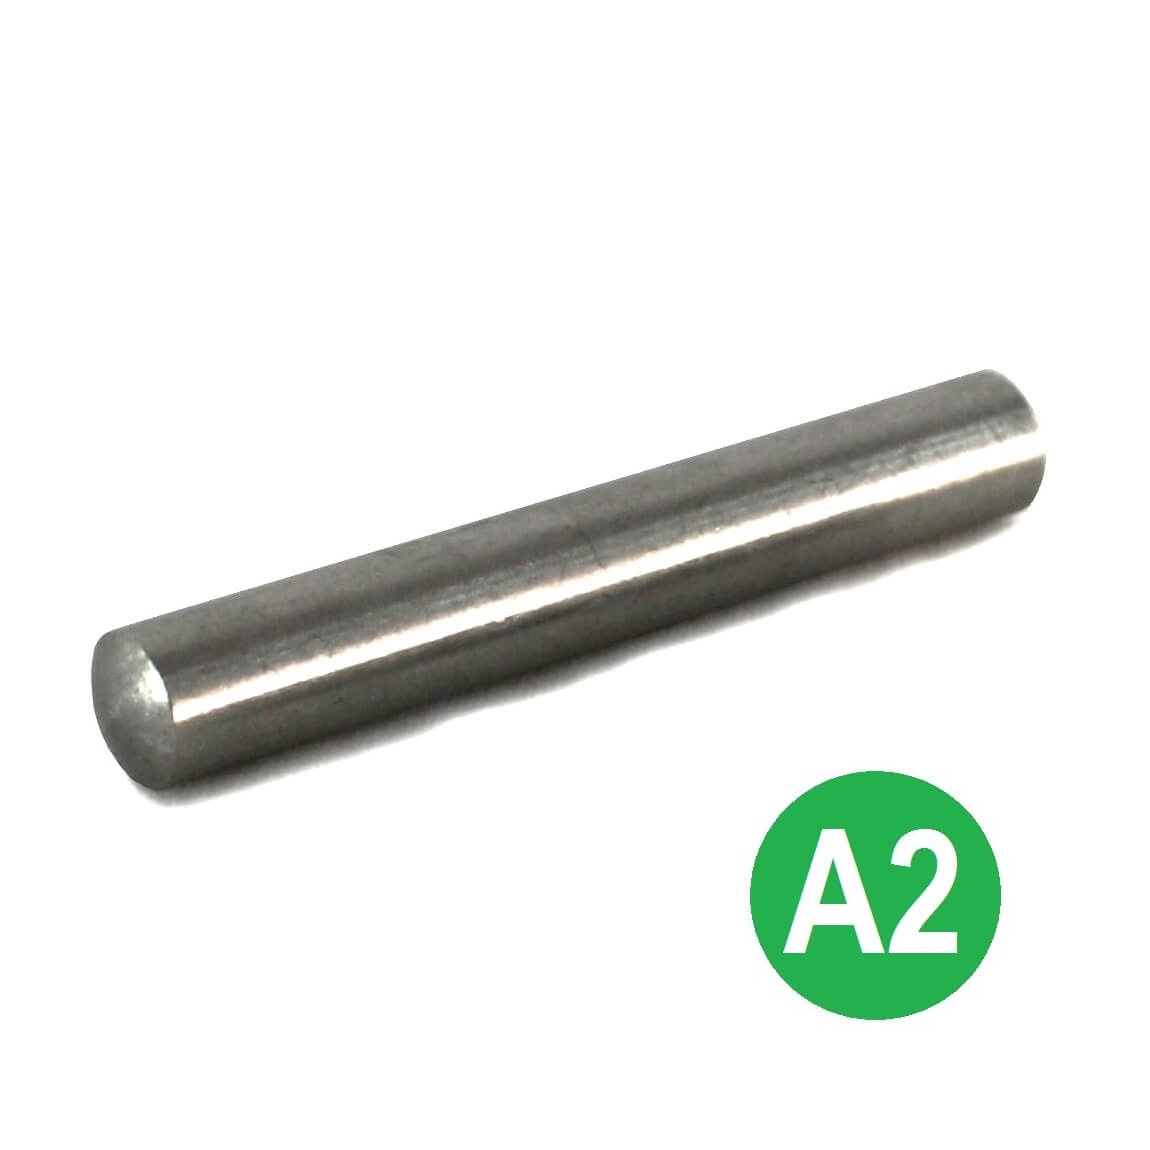 4mm Dia x 20mm A2 Stainless Dowel Pins DIN 7